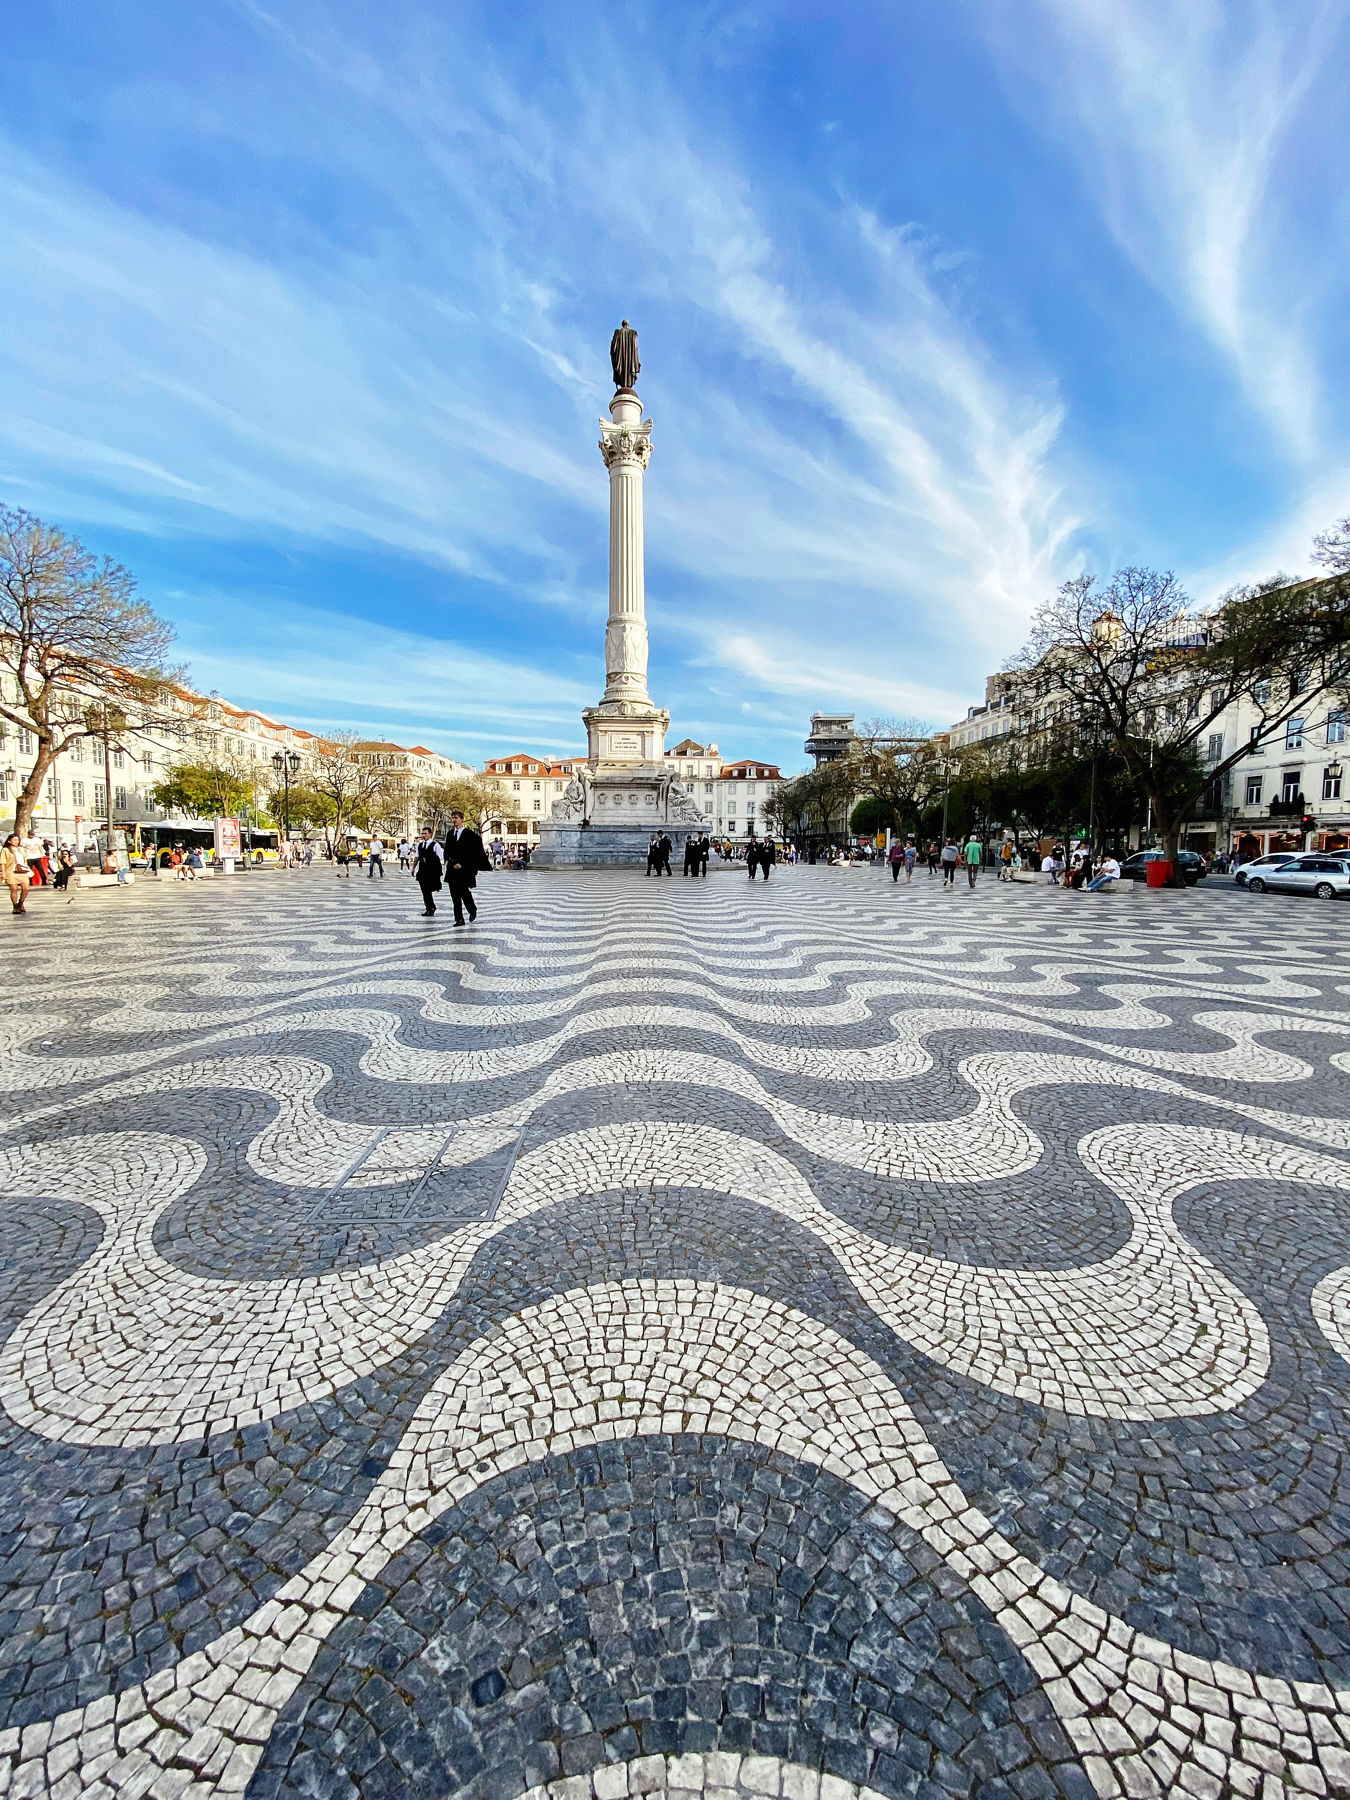 Wavy lines of balck and white mosaic tile in a town square with staue on tall column